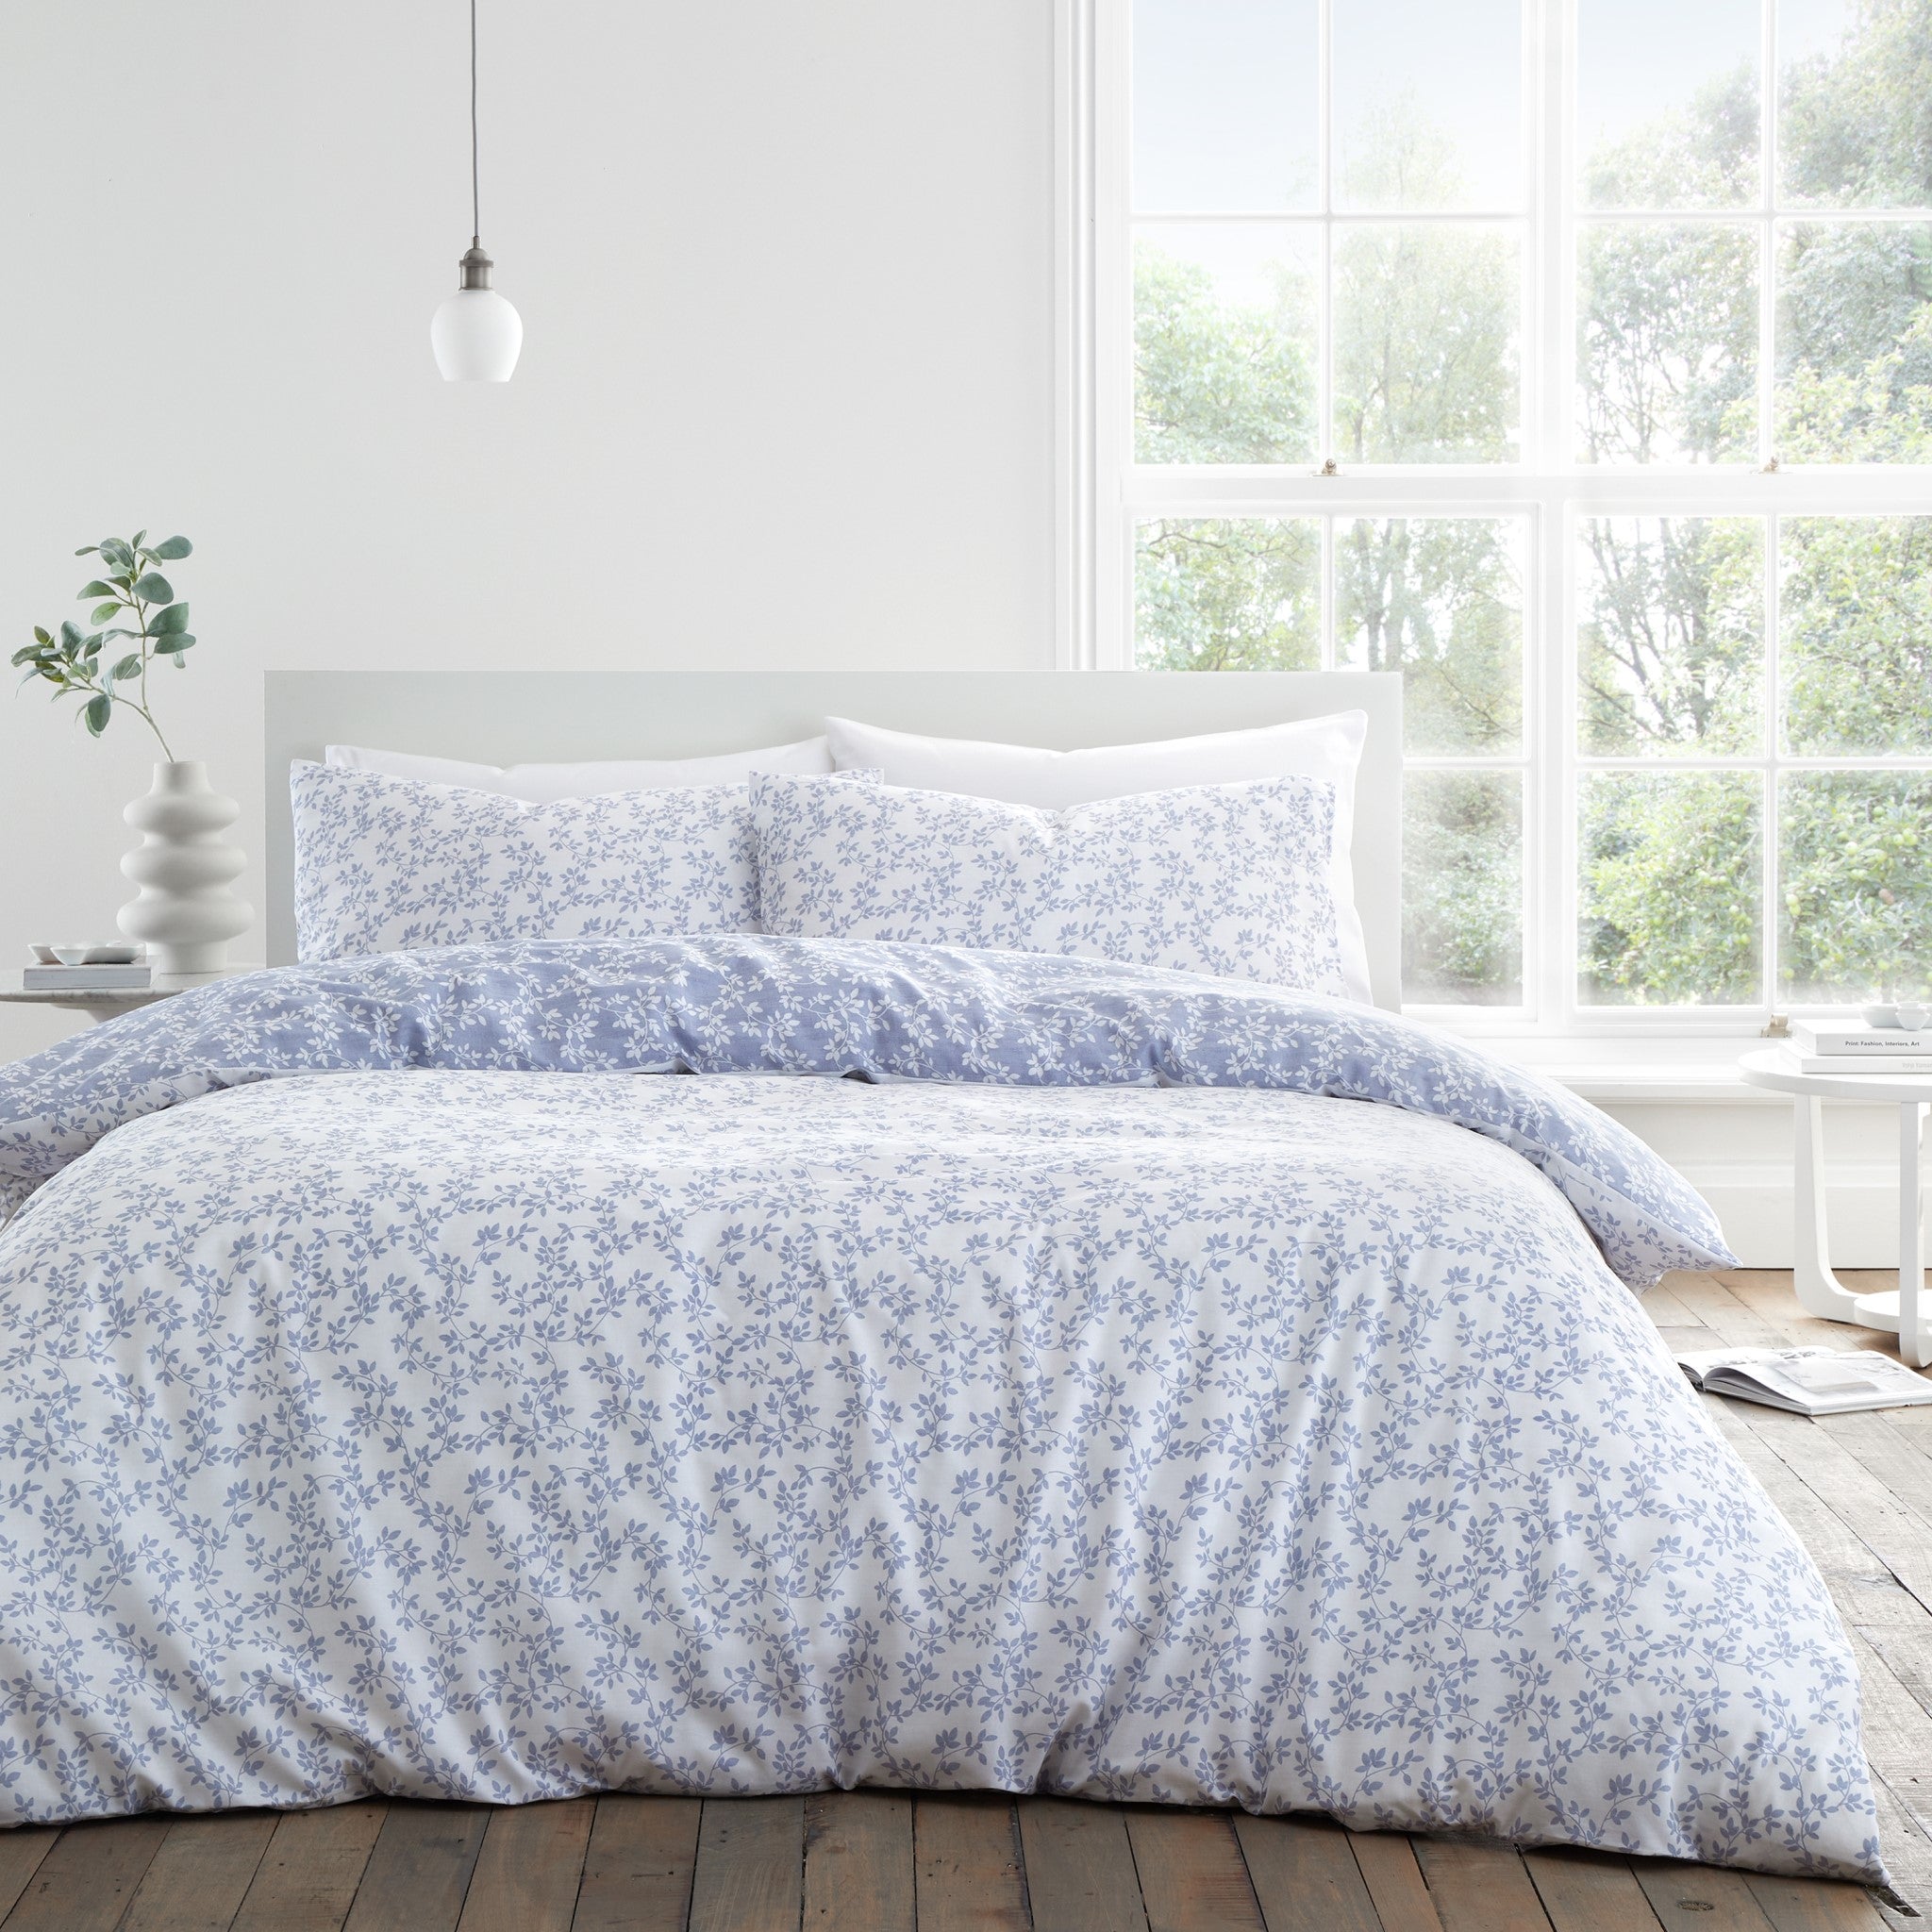 Bianca Shadow Leaves 200 Thread Count Cotton Single Duvet Cover Set with Pillowcase French Blue